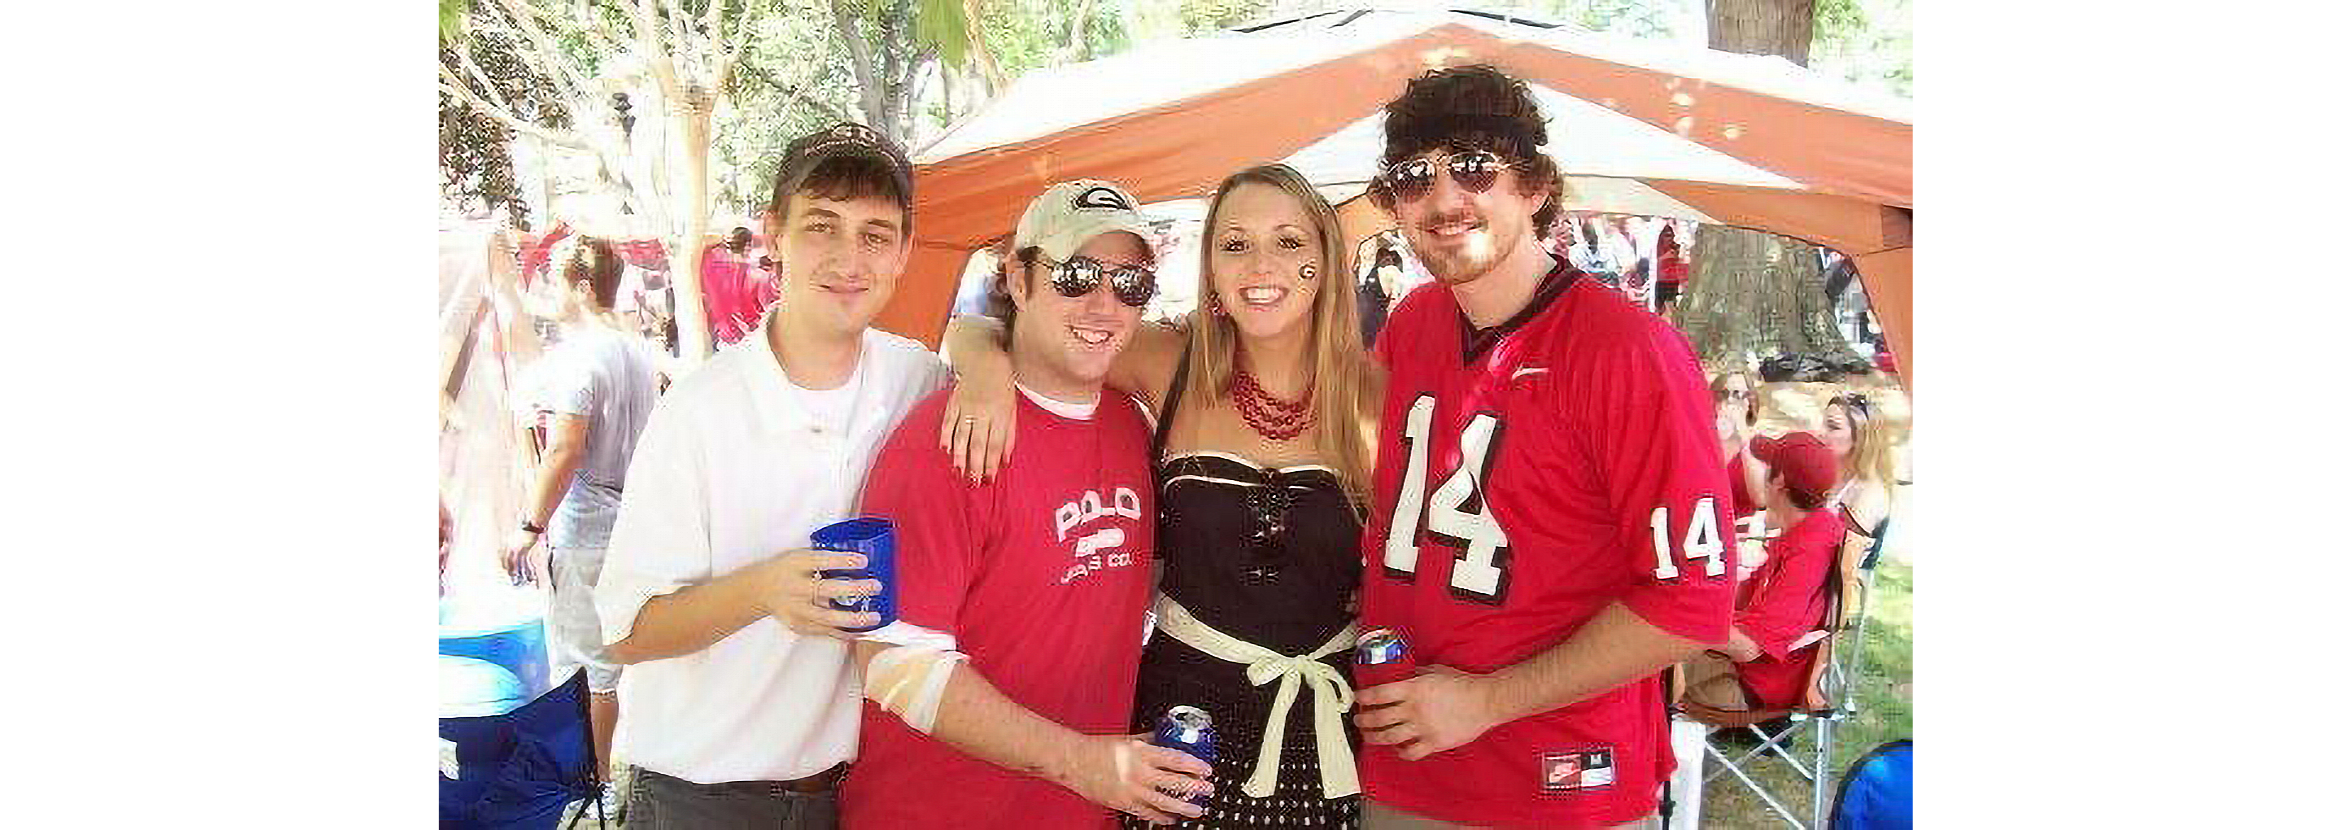 Tate Henshaw with three friends at the University of Georgia.